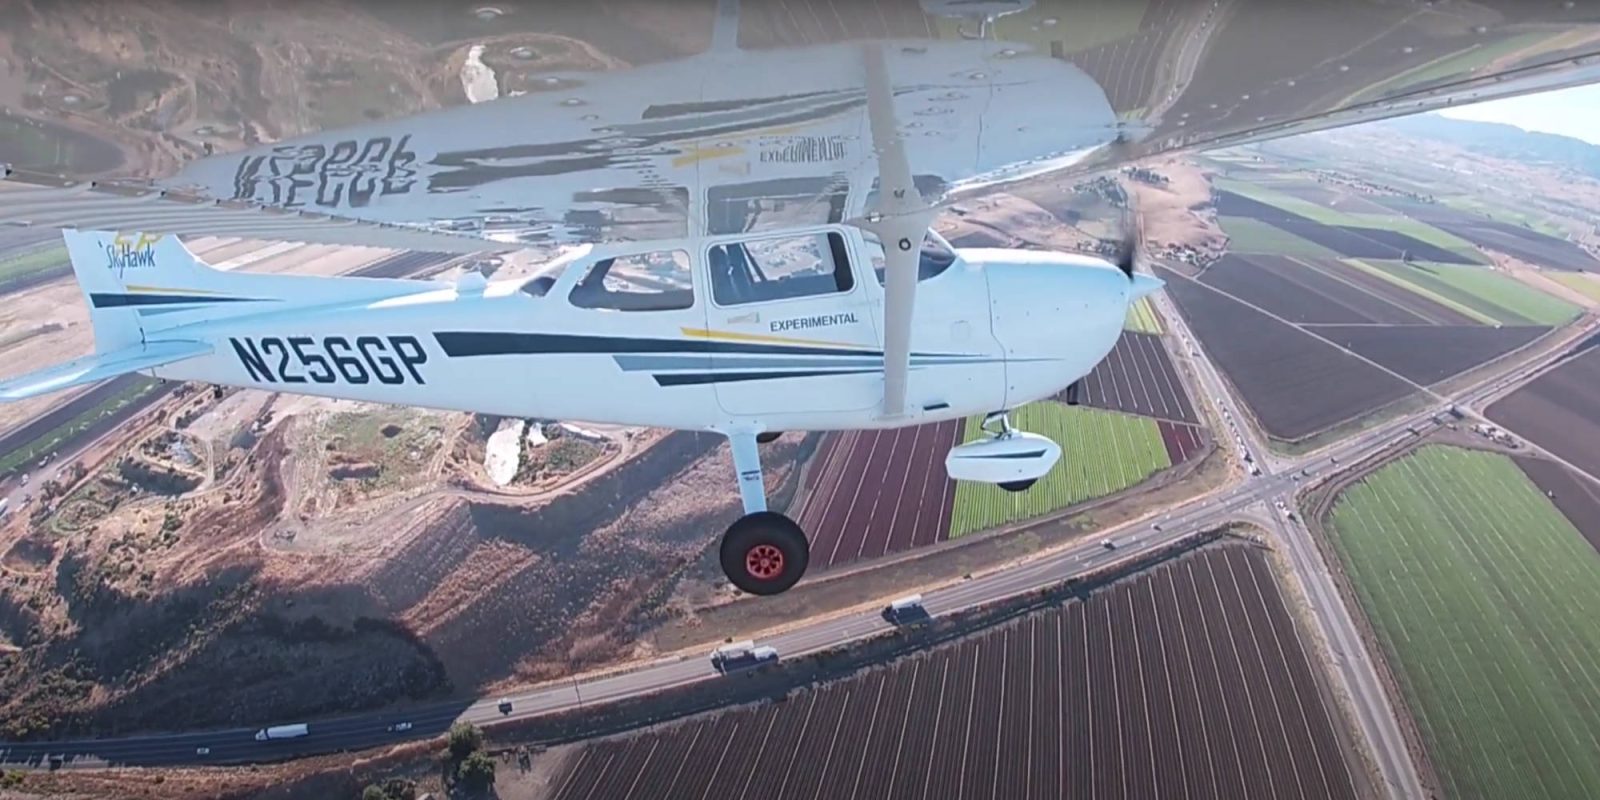 Cessna plane unmanned aircraft